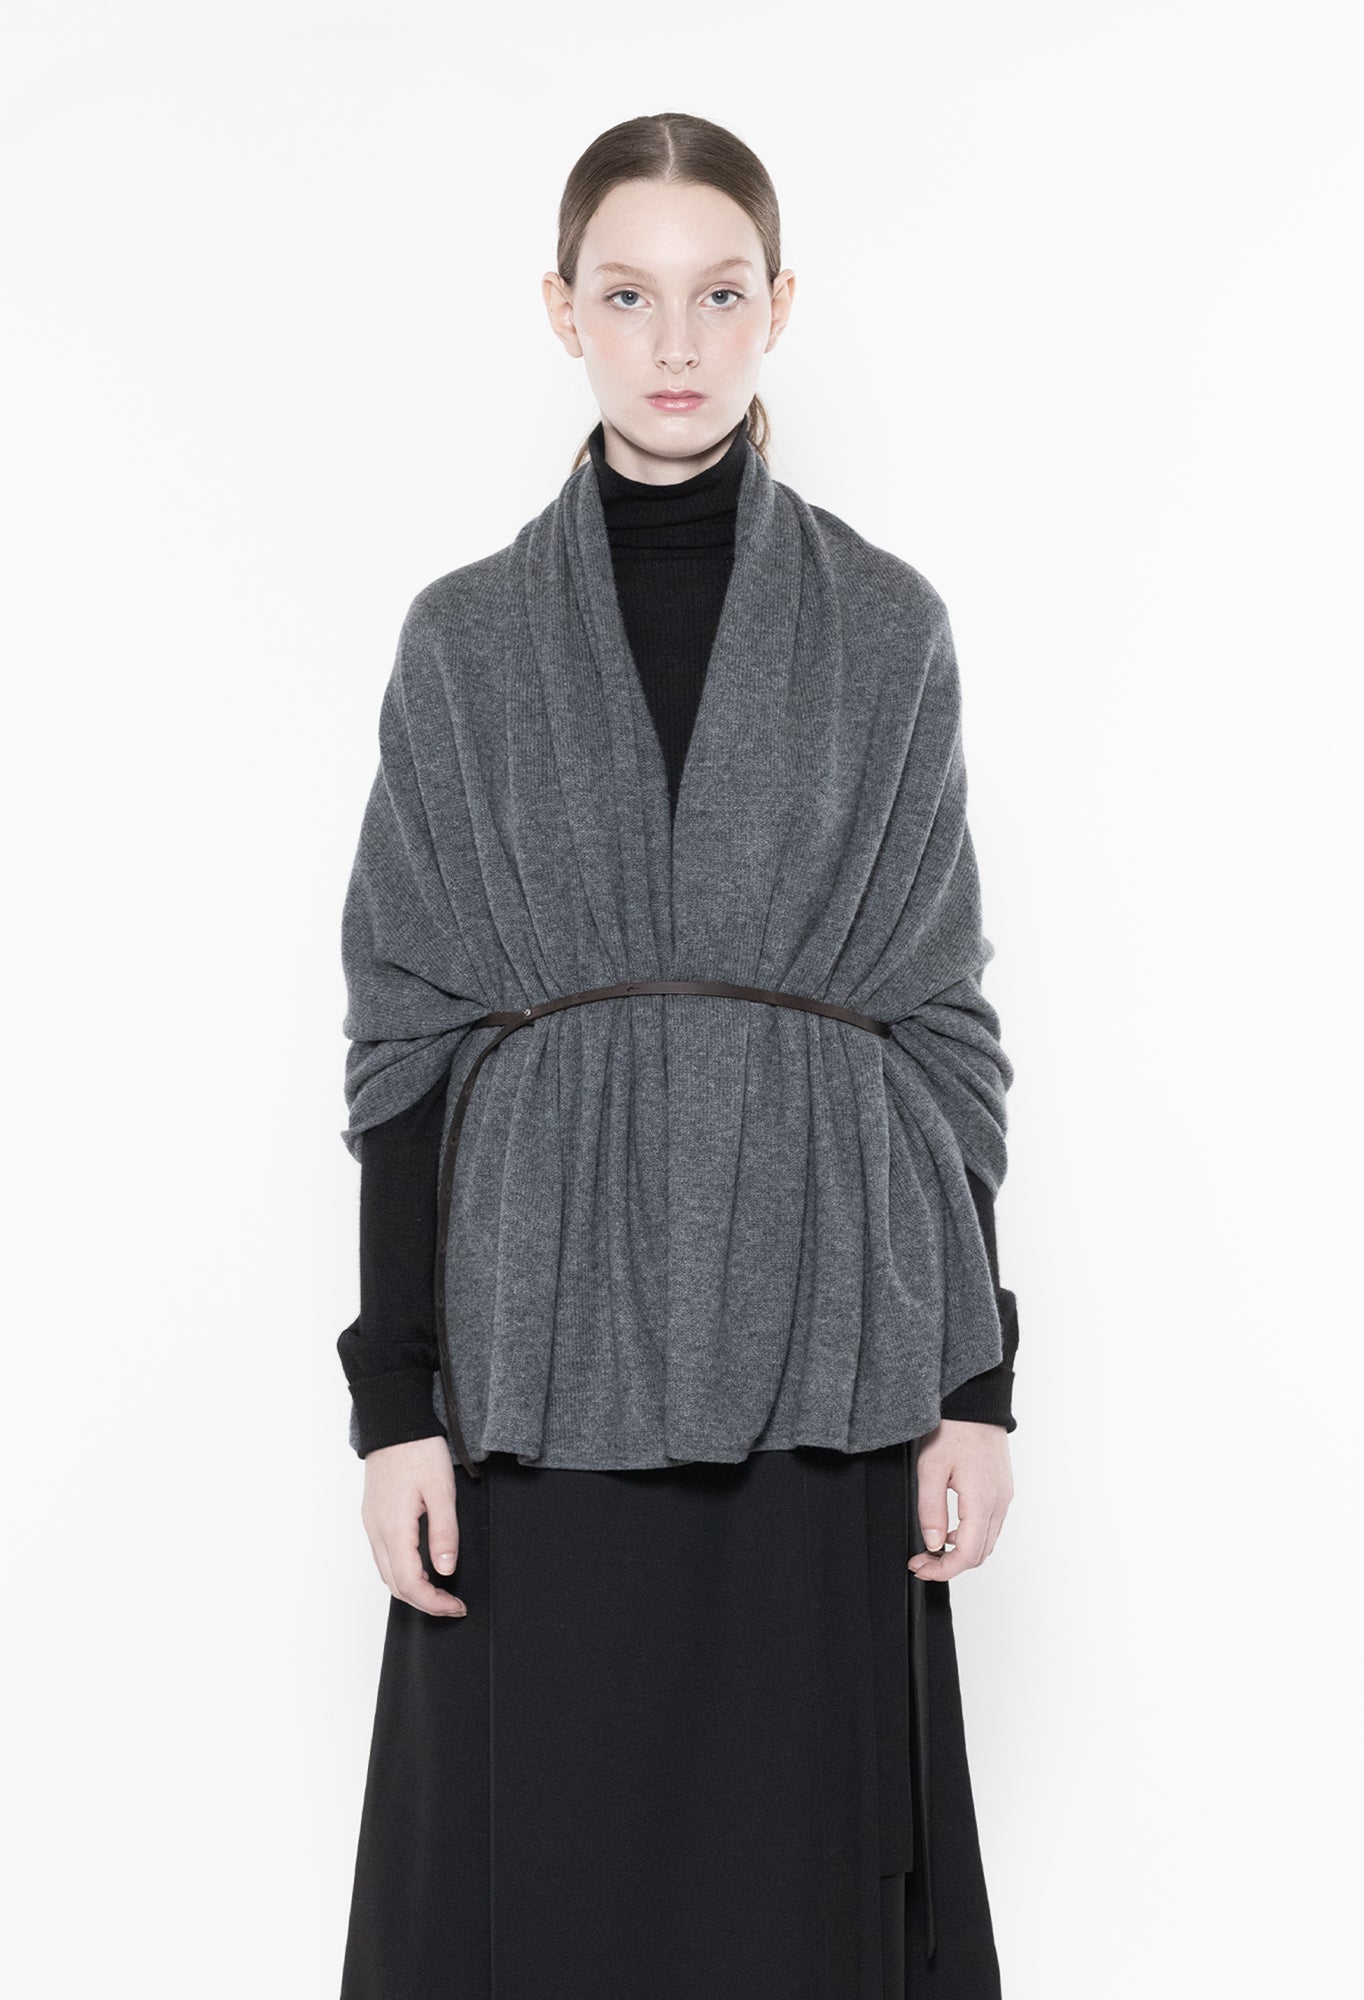 CASHMERE TRAVEL BLANKET by OYUNA in Black